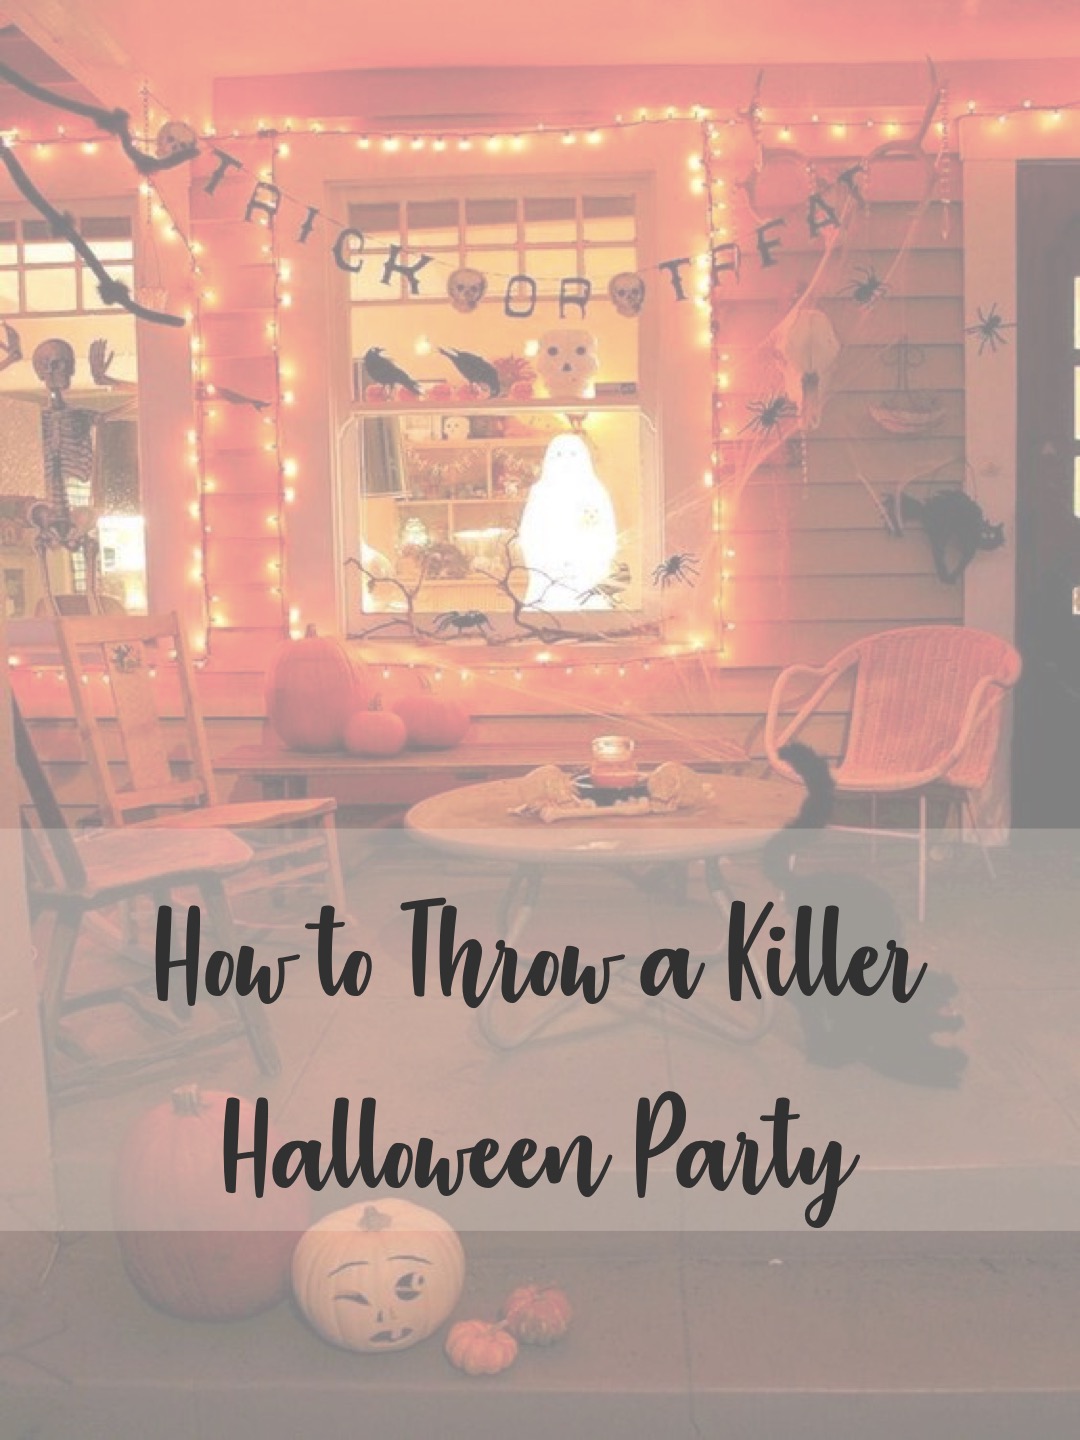 How To Throw a Killer Halloween Party